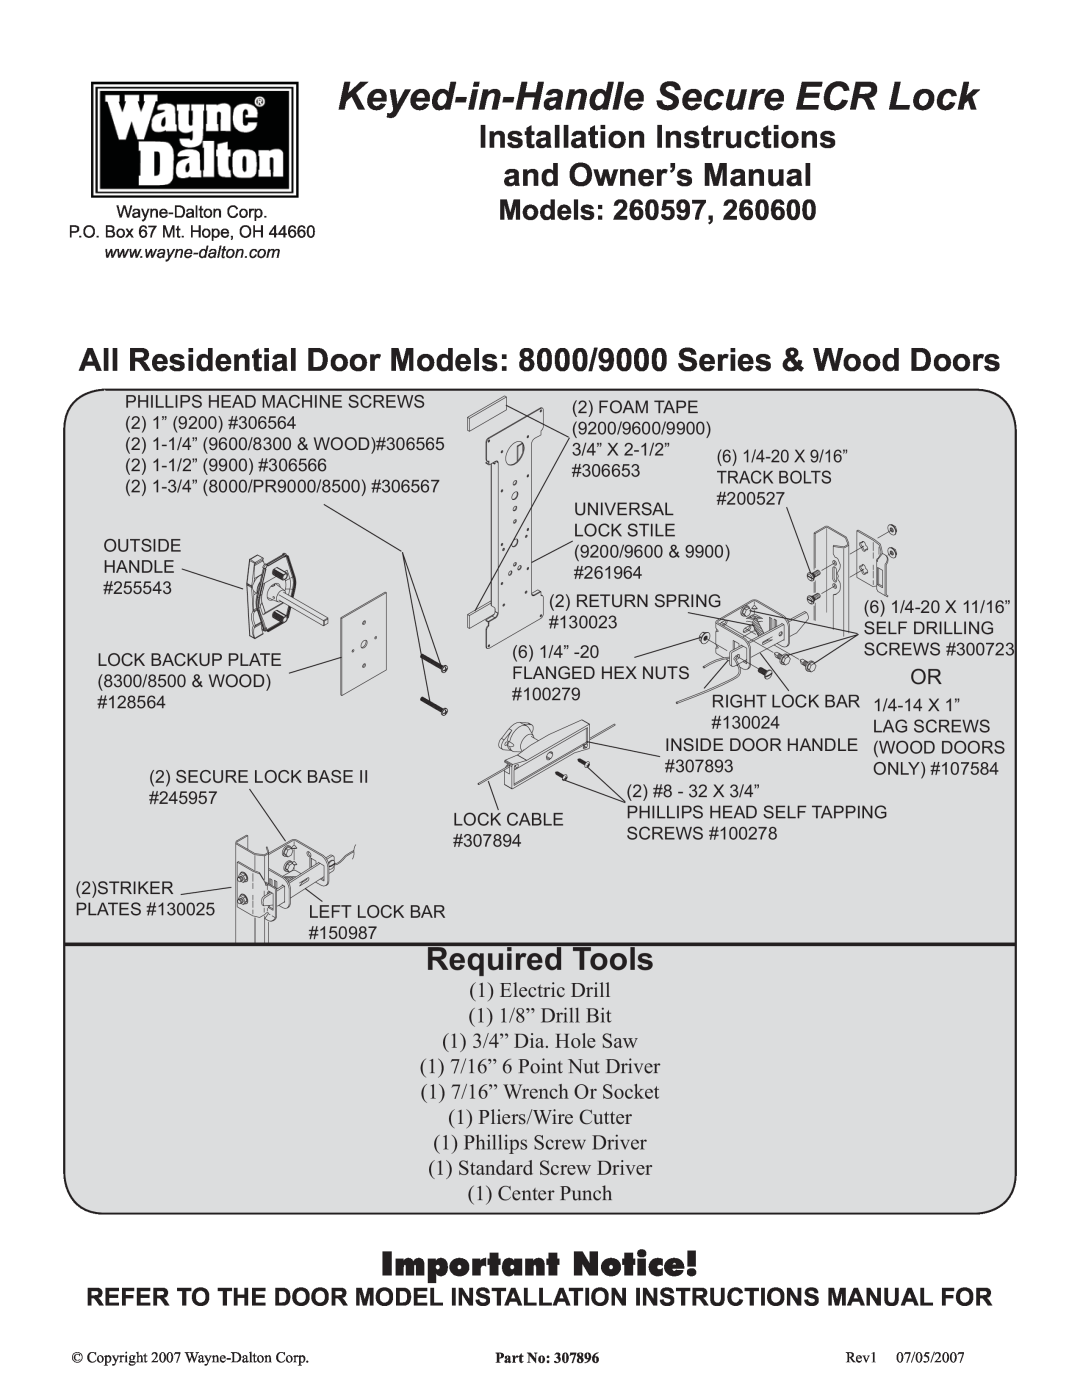 Wayne-Dalton 260597 installation instructions Keyed-in-HandleSecure ECR Lock, Important Notice, Required Tools, Models 